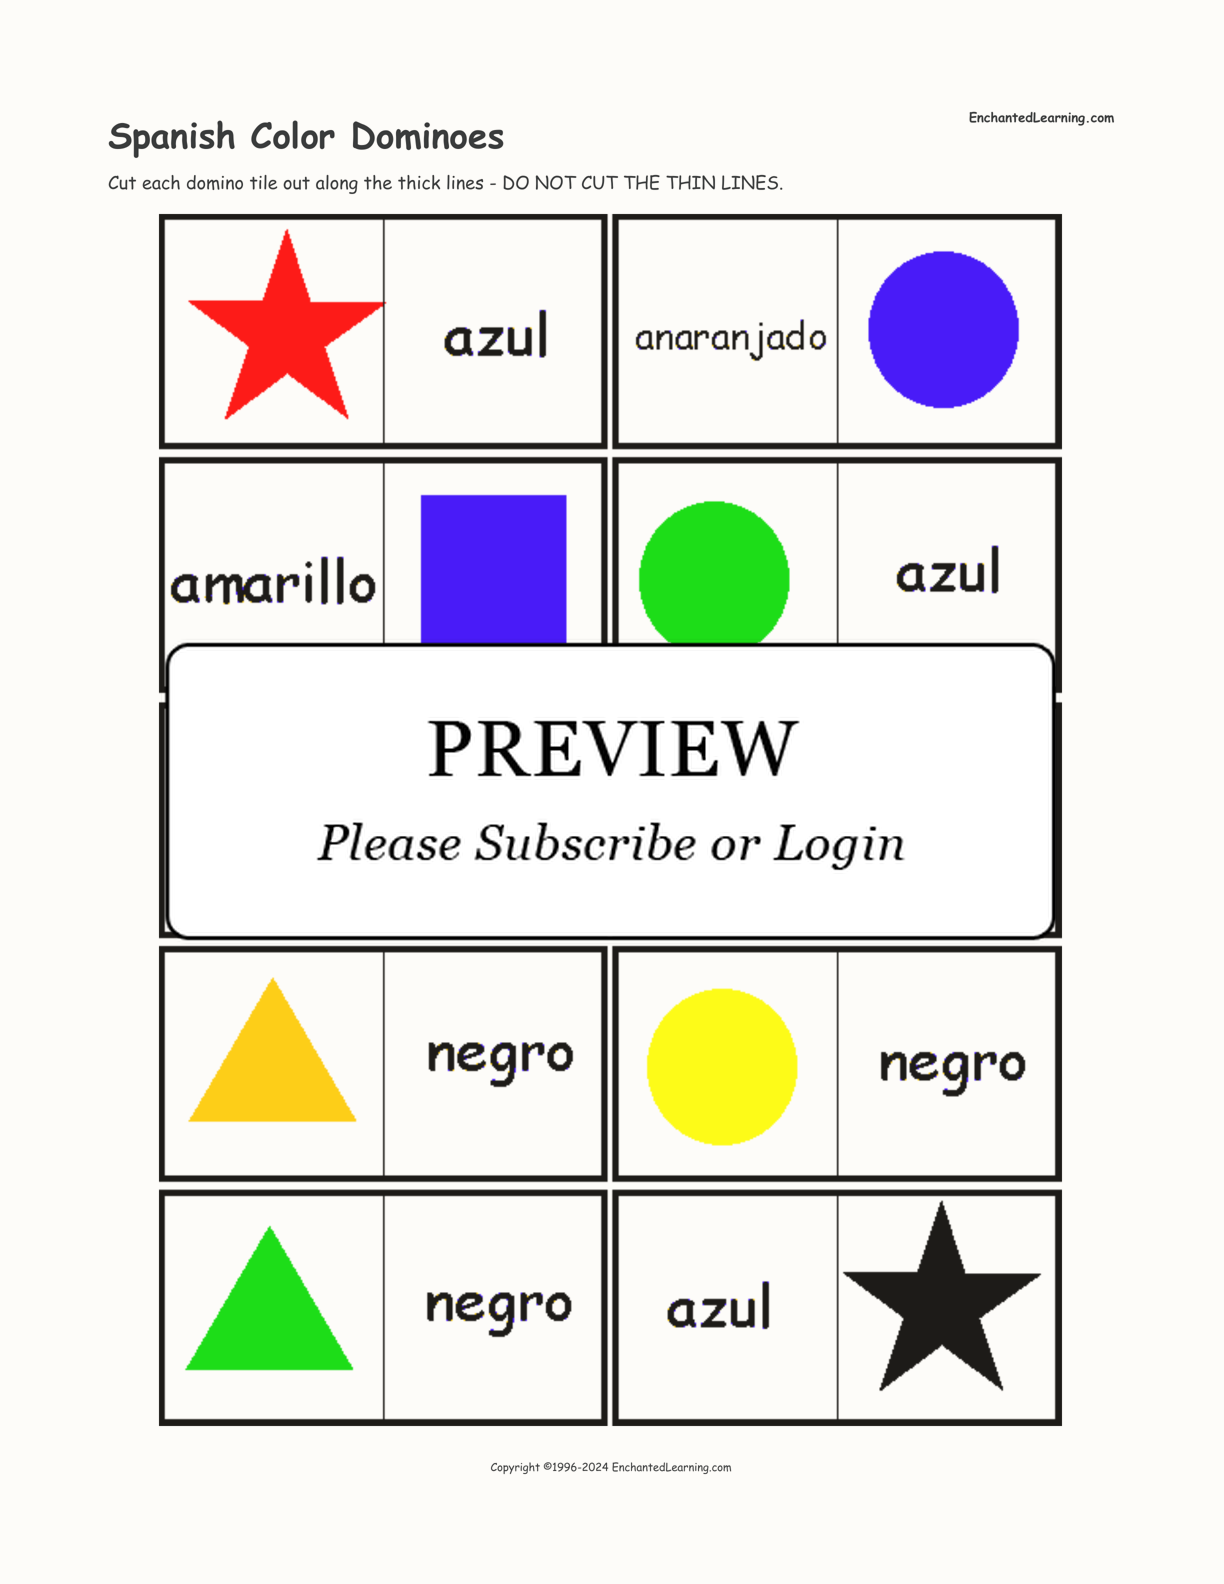 Spanish Color Dominoes interactive printout page 1